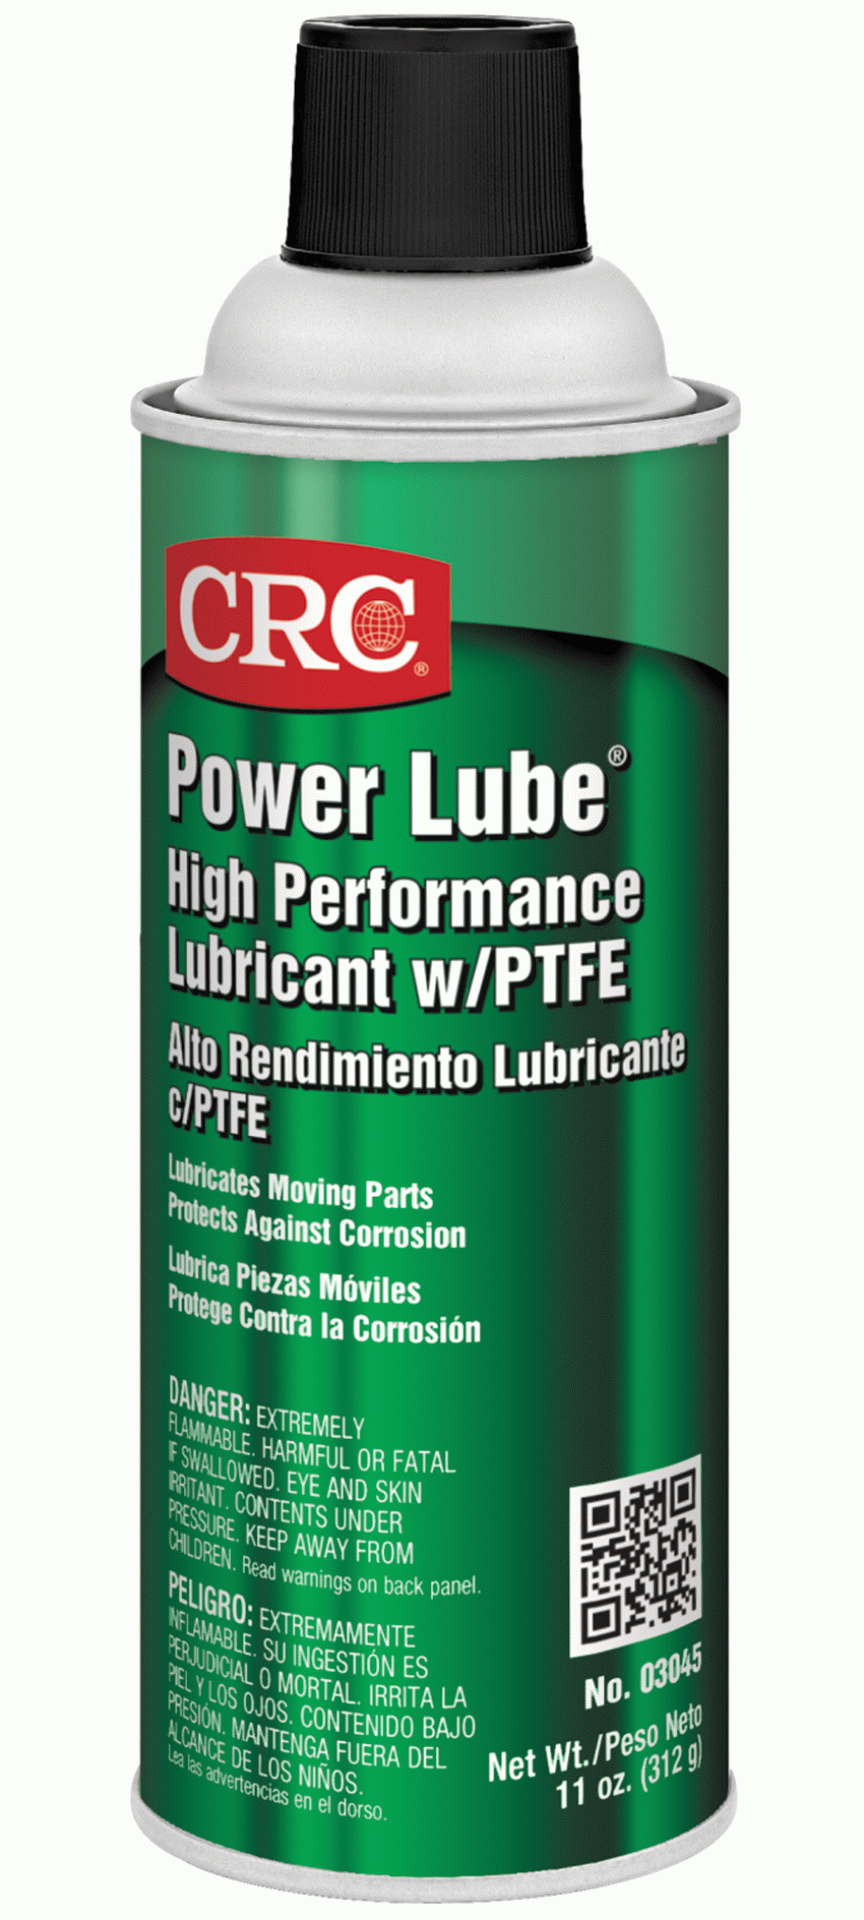 CRC CHEMICALS USA | 03045 | POWER LUBE INDUSTRIAL HIGH PERFORMANCE LUBRICANT W/PTFE 11 Oz.